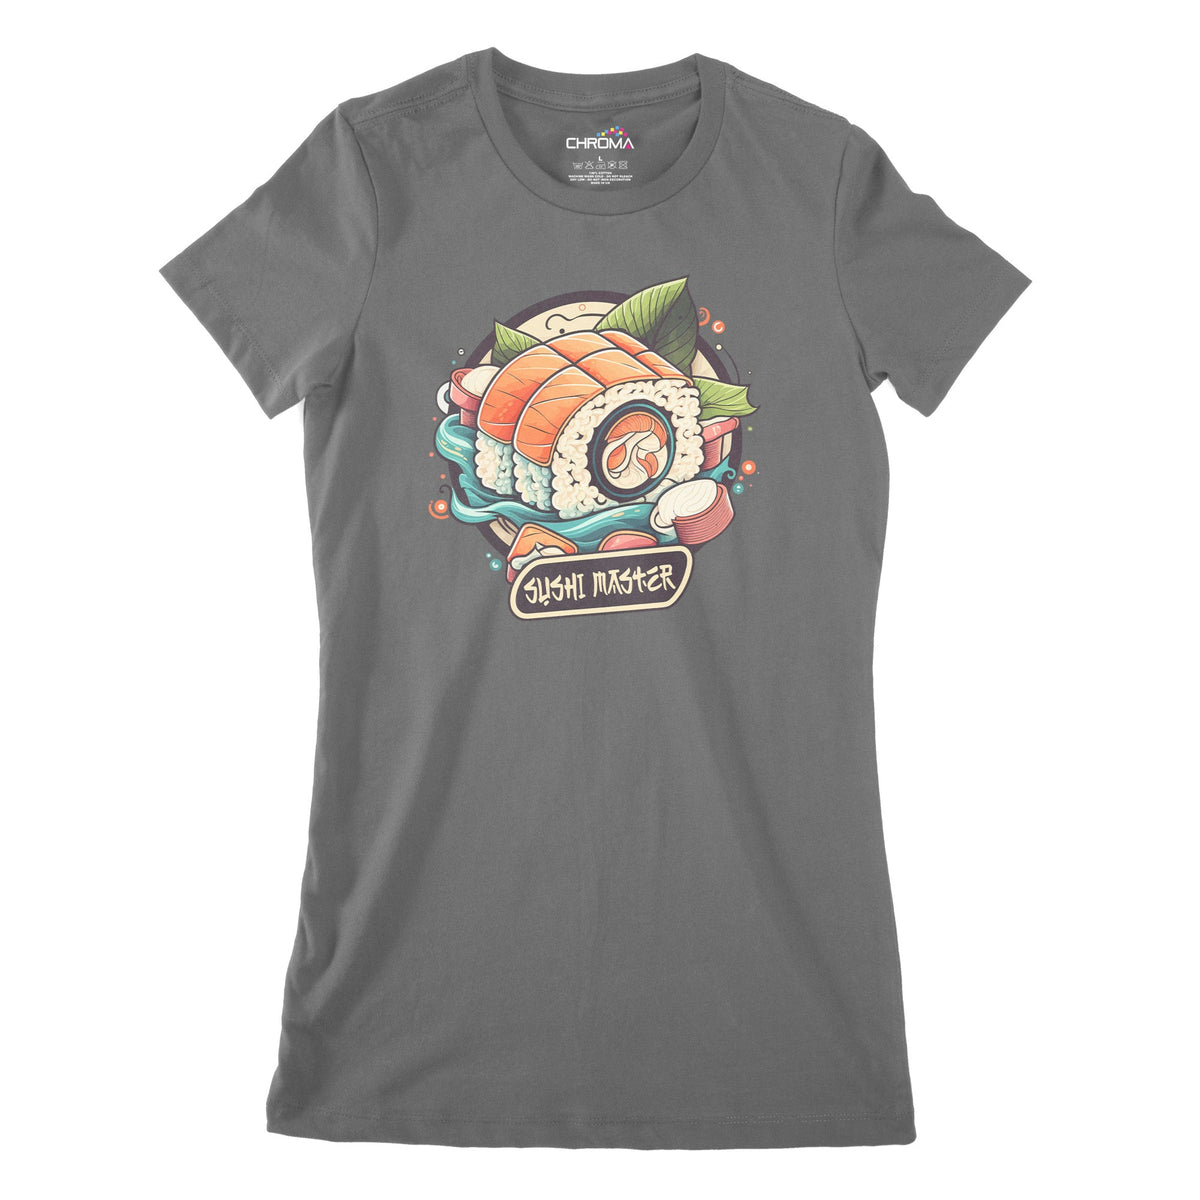 Sushi Master Women's Classic Fitted T-Shirt Chroma Clothing